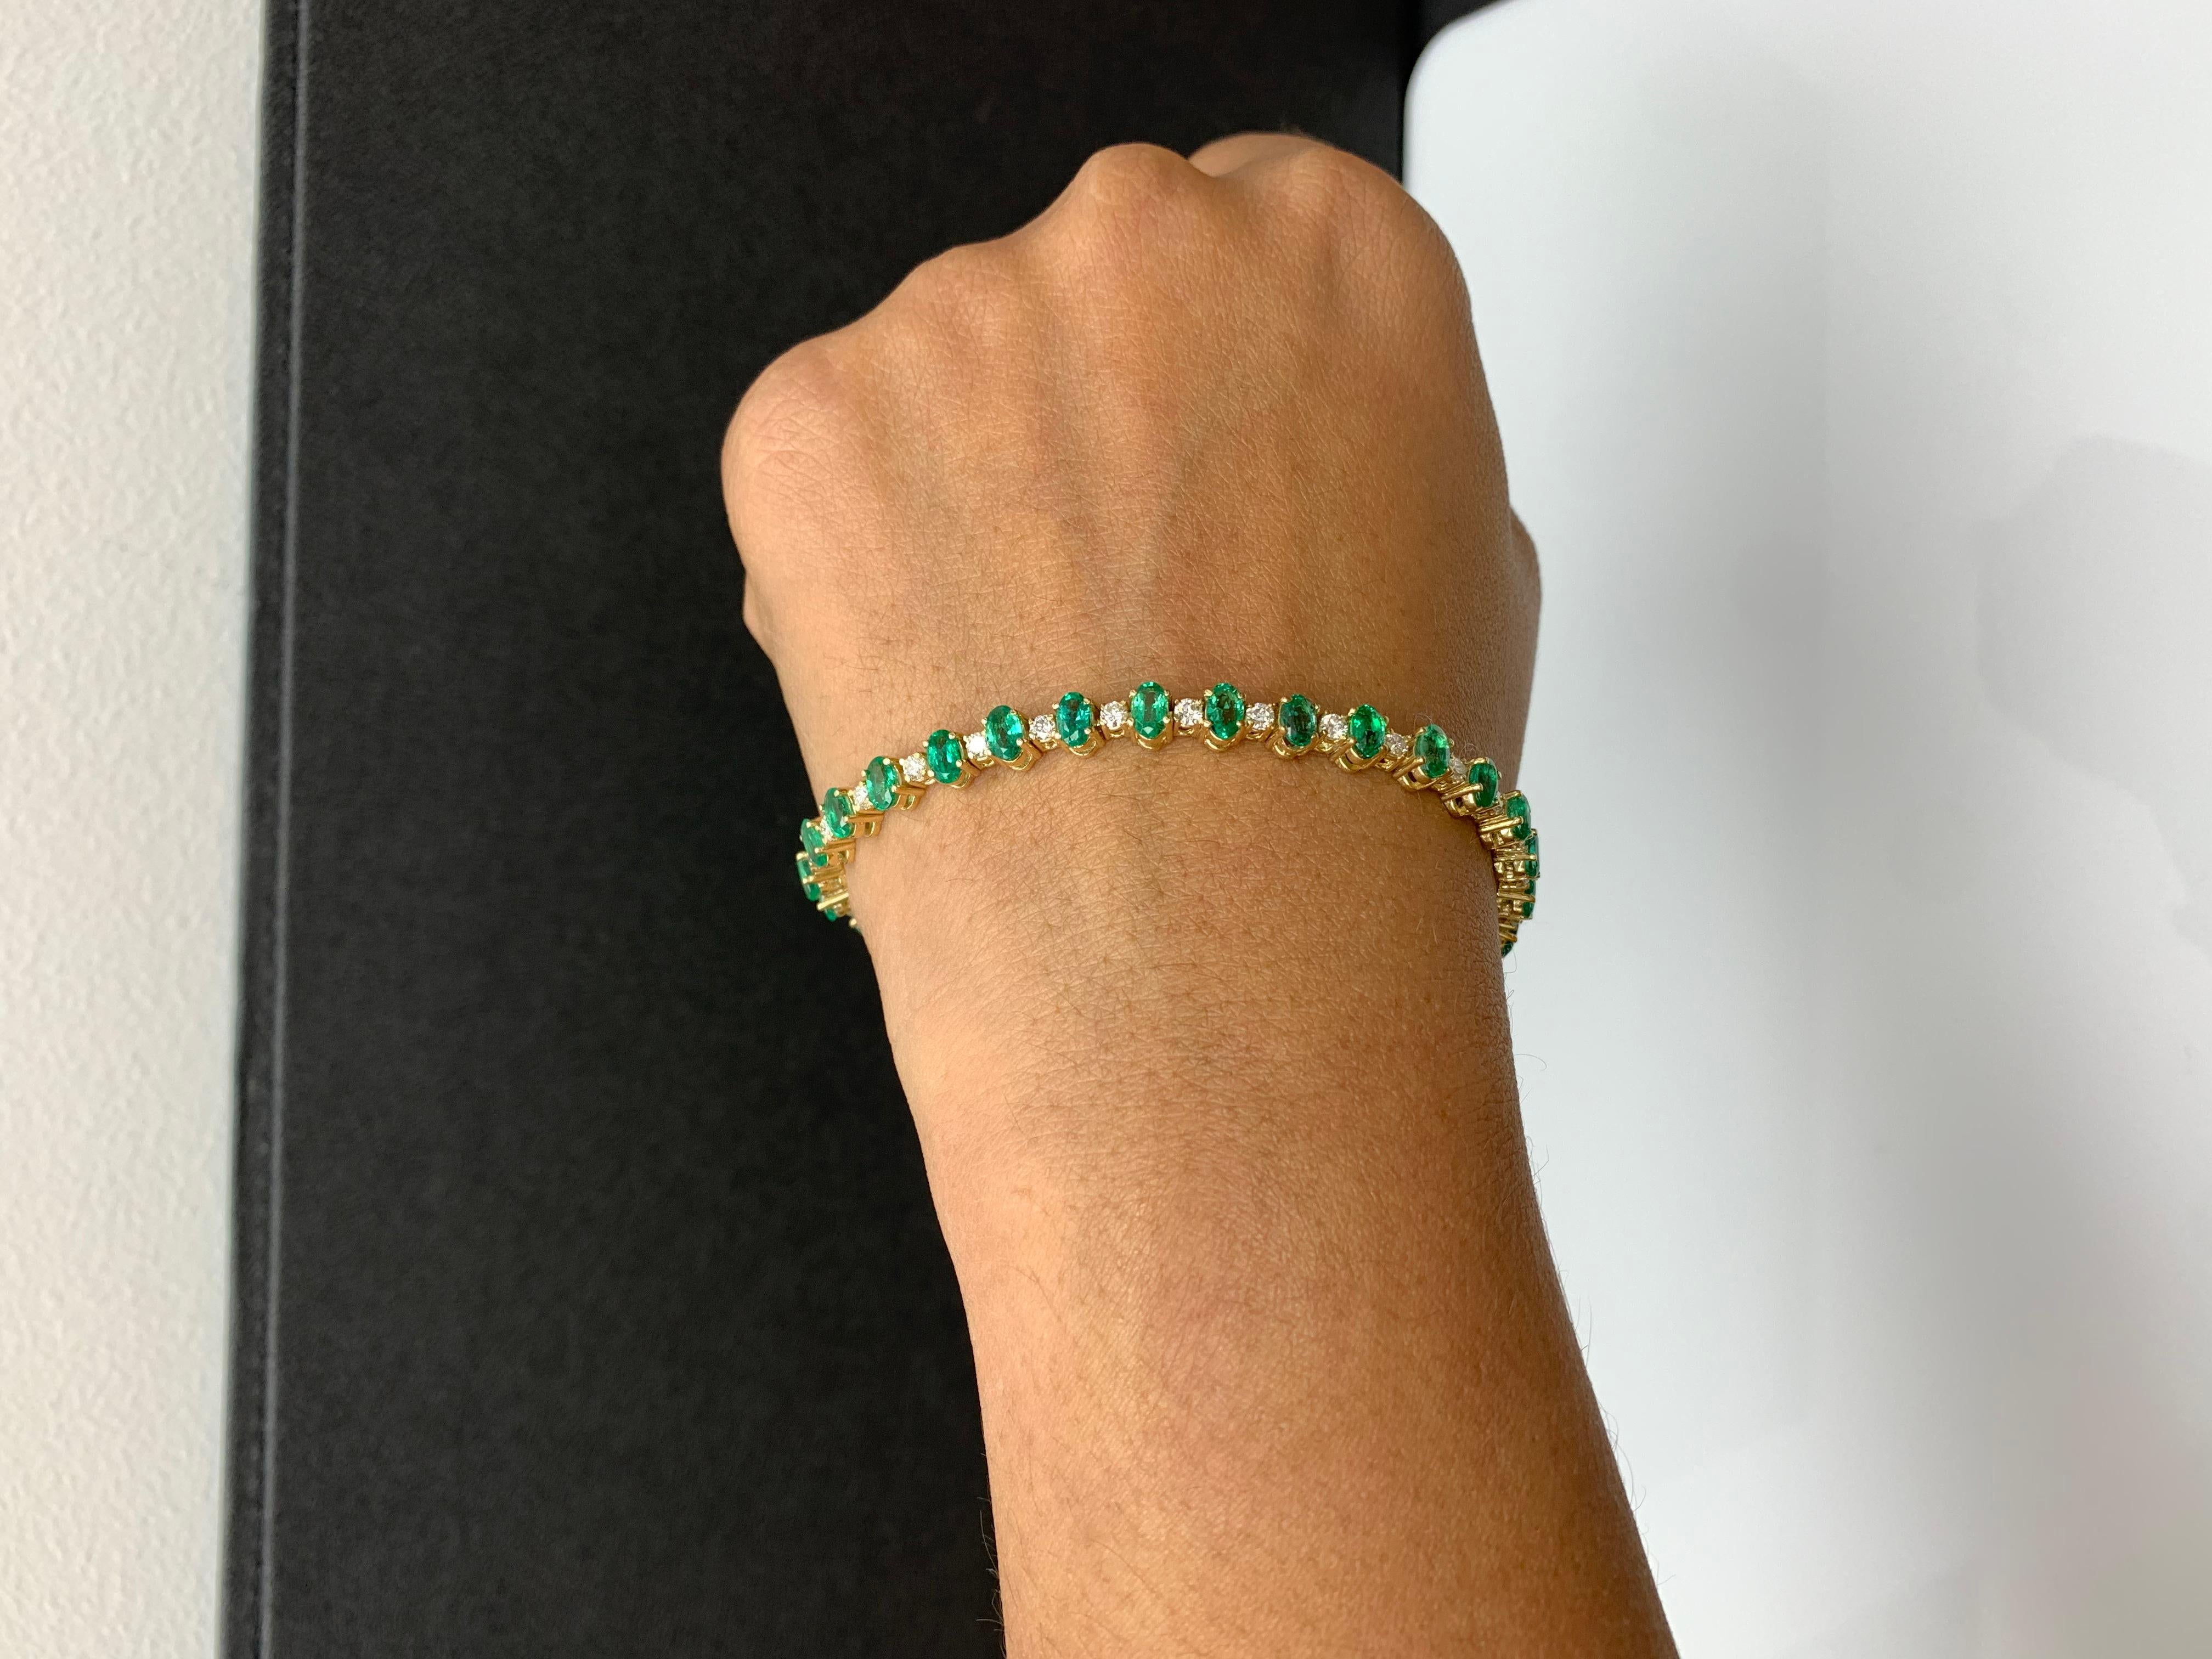 A stunning bracelet set with 30 Vibrant oval cut emeralds weighing 6.30 carats total. Alternating these emeralds are 30 sparkling round diamonds weighing 1.48 carats total. Set in polished 14k yellow gold. Double lock mechanism for maximum security.